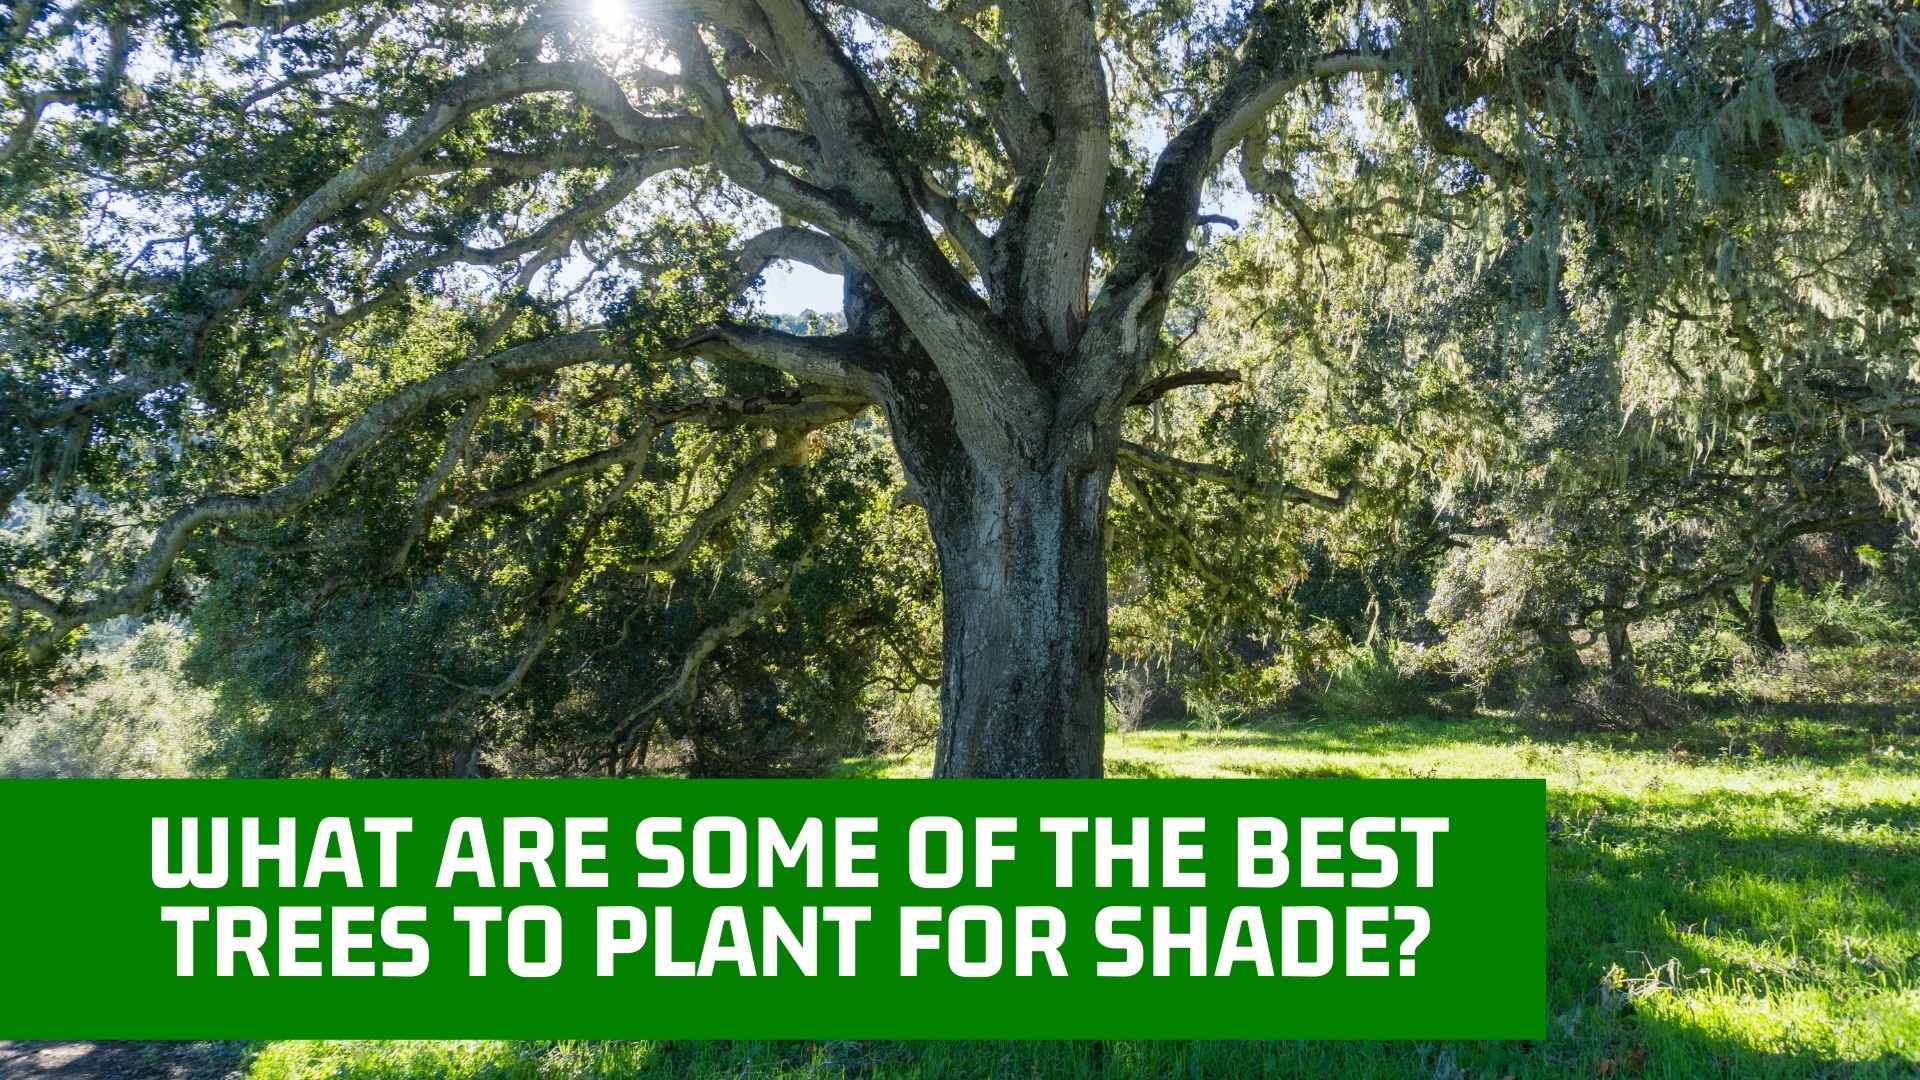 Why Are Some of the Best Trees to Plant for Shade